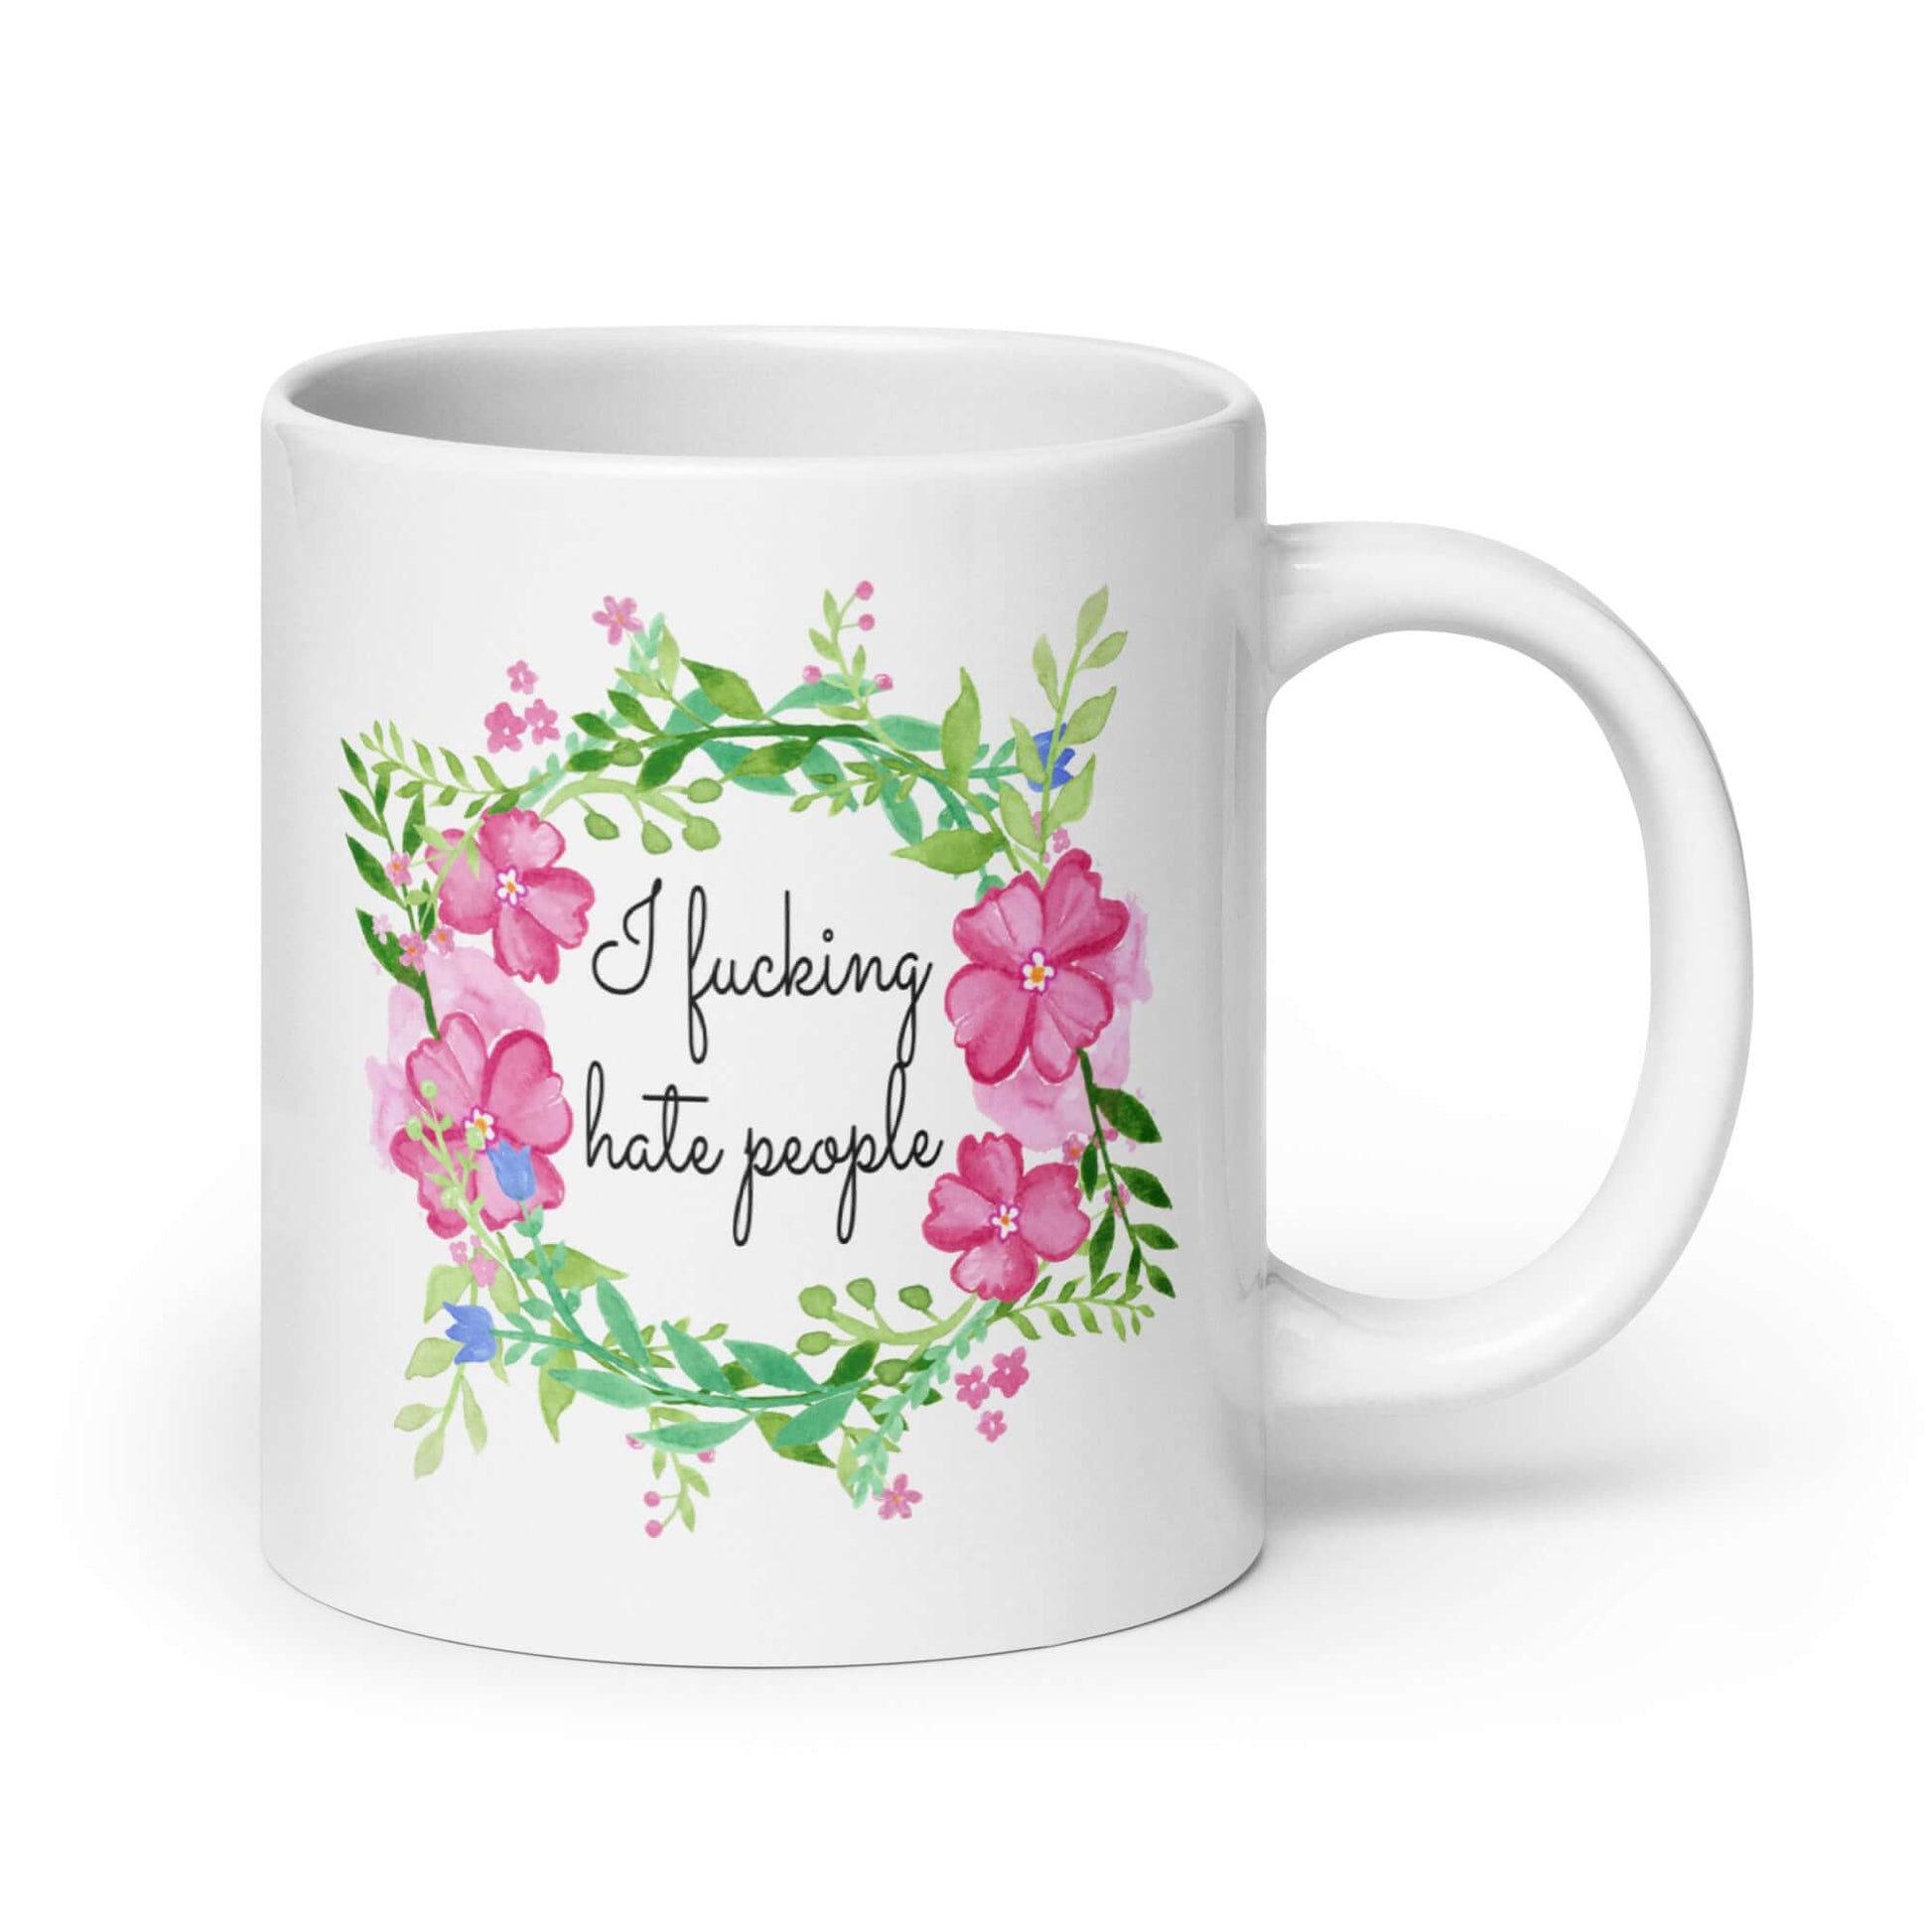 White ceramic mug with pink and green floral wreath image and the words I fucking hate people printed on both sides.